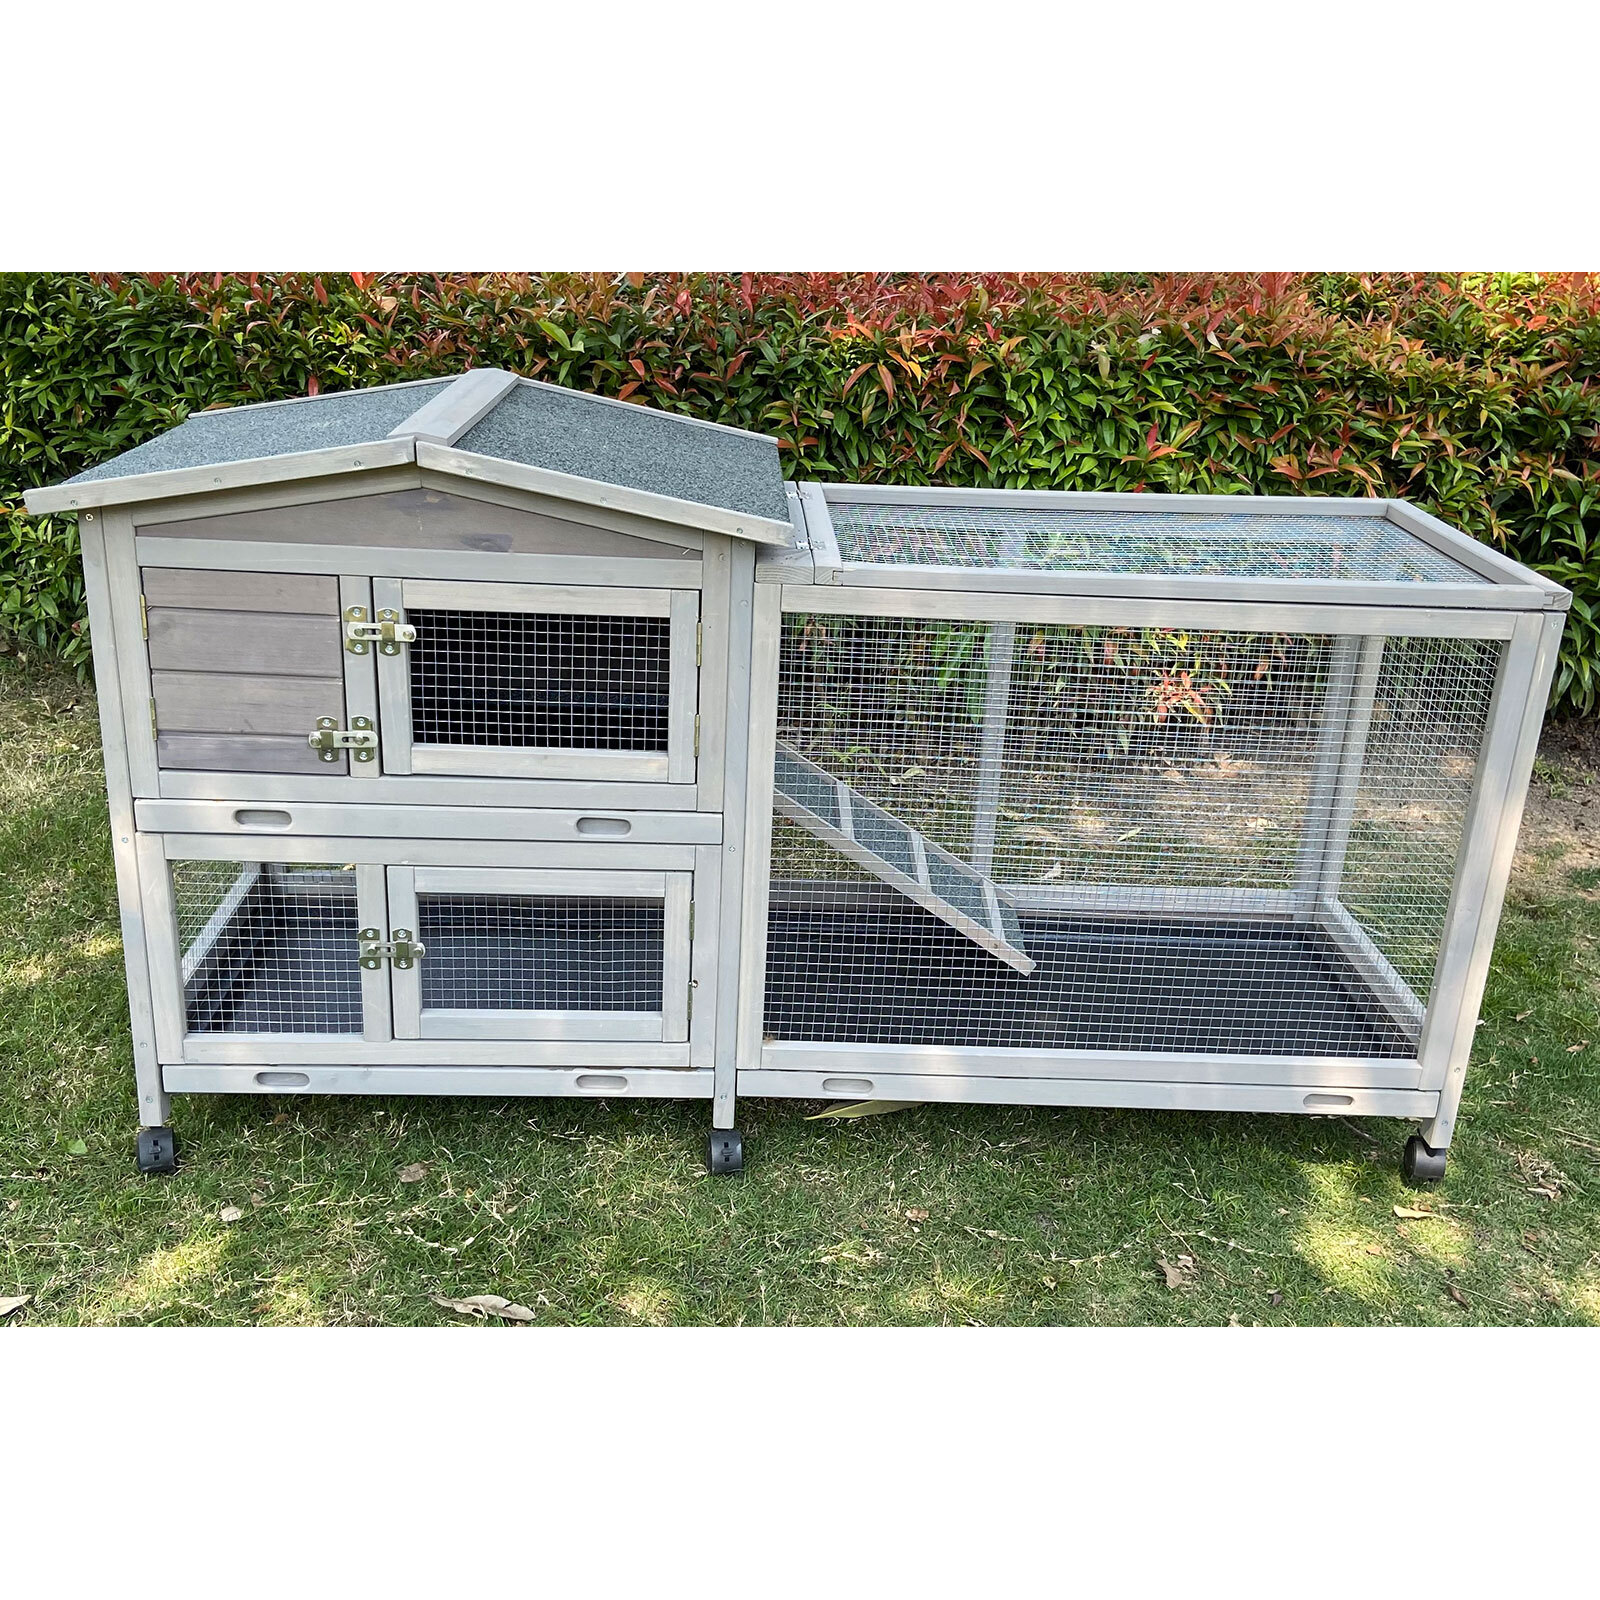 Flyline Bunny House Rabbit Hutch Guinea Pig Cage on Wheels